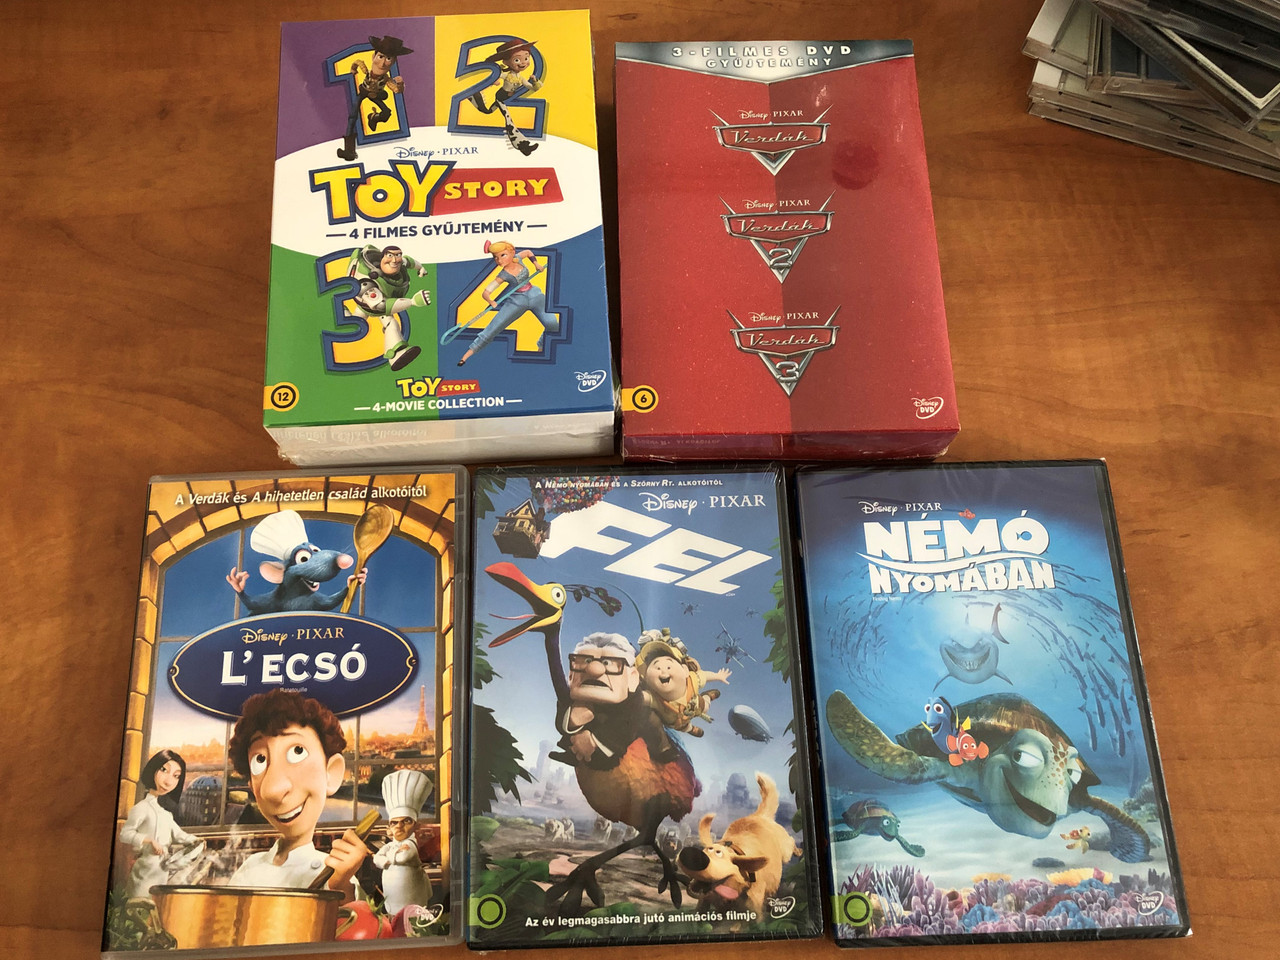 Special Disney DVD selection from Hungary: Toy Story 1, 2. 3, 4 / Cars  1,2,3 / UP / Nemo / Ratatouille - Bible in My Language